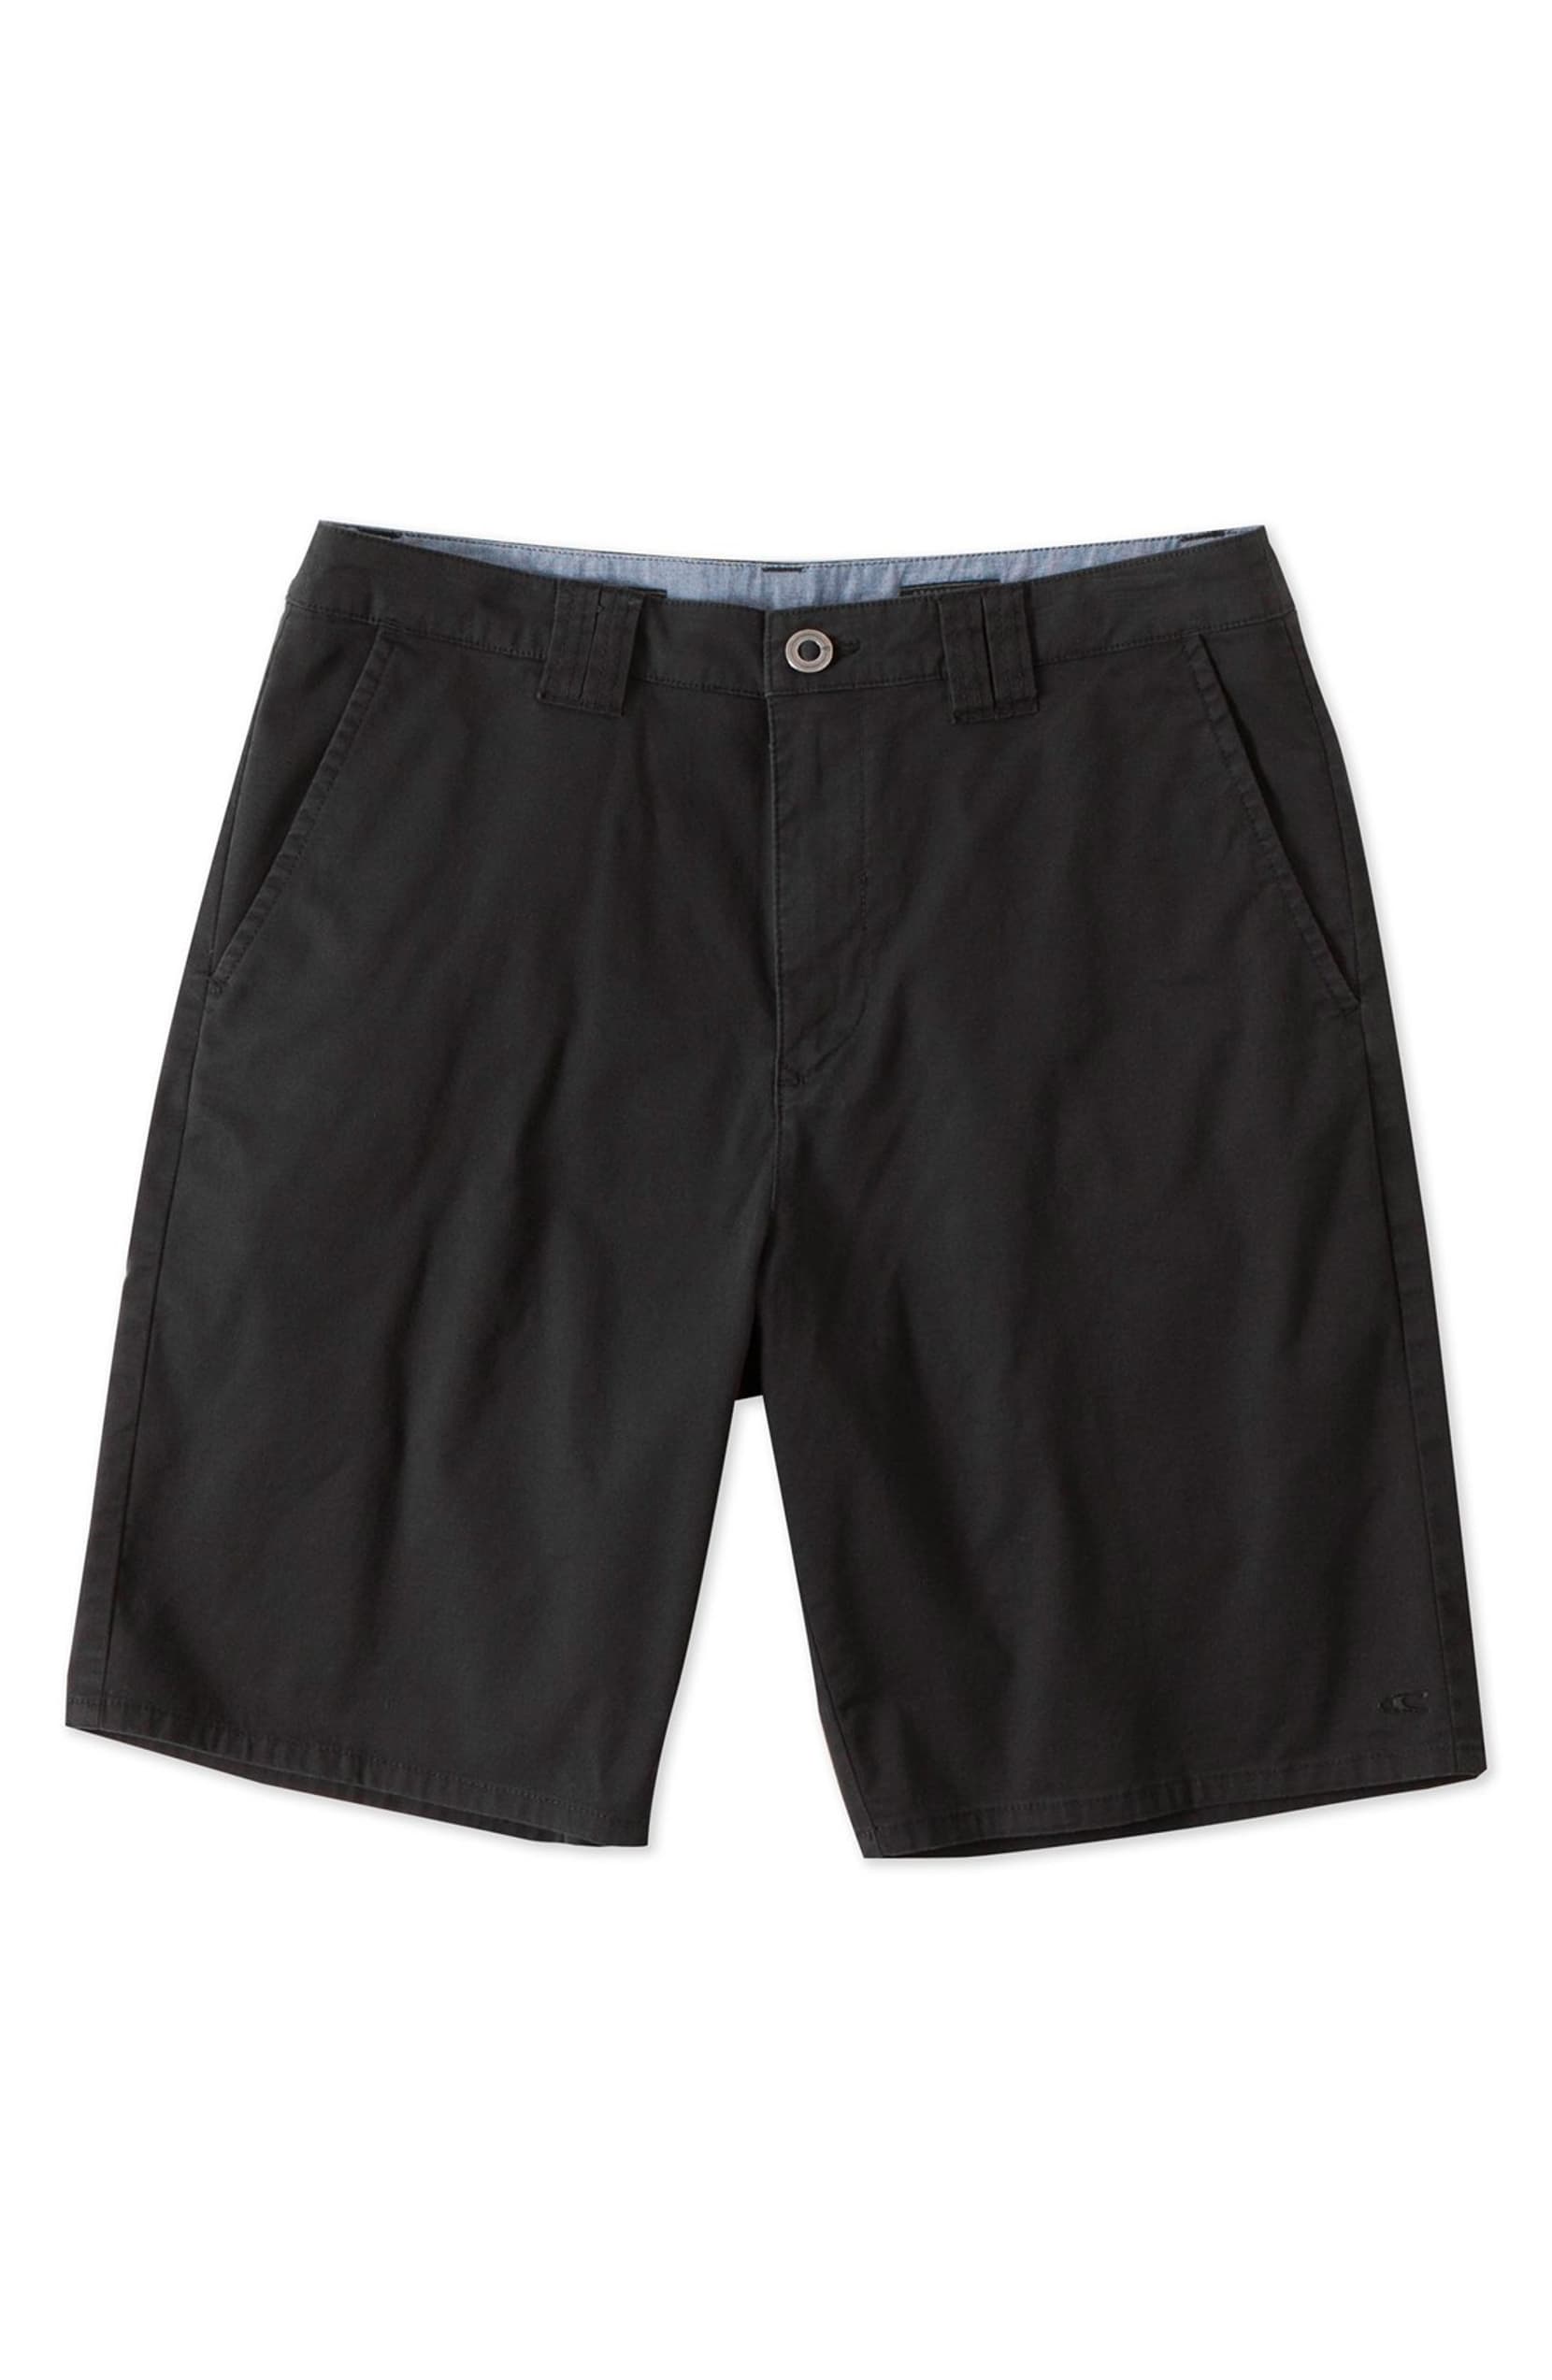 O'neill Contact Youth Short BLK 22